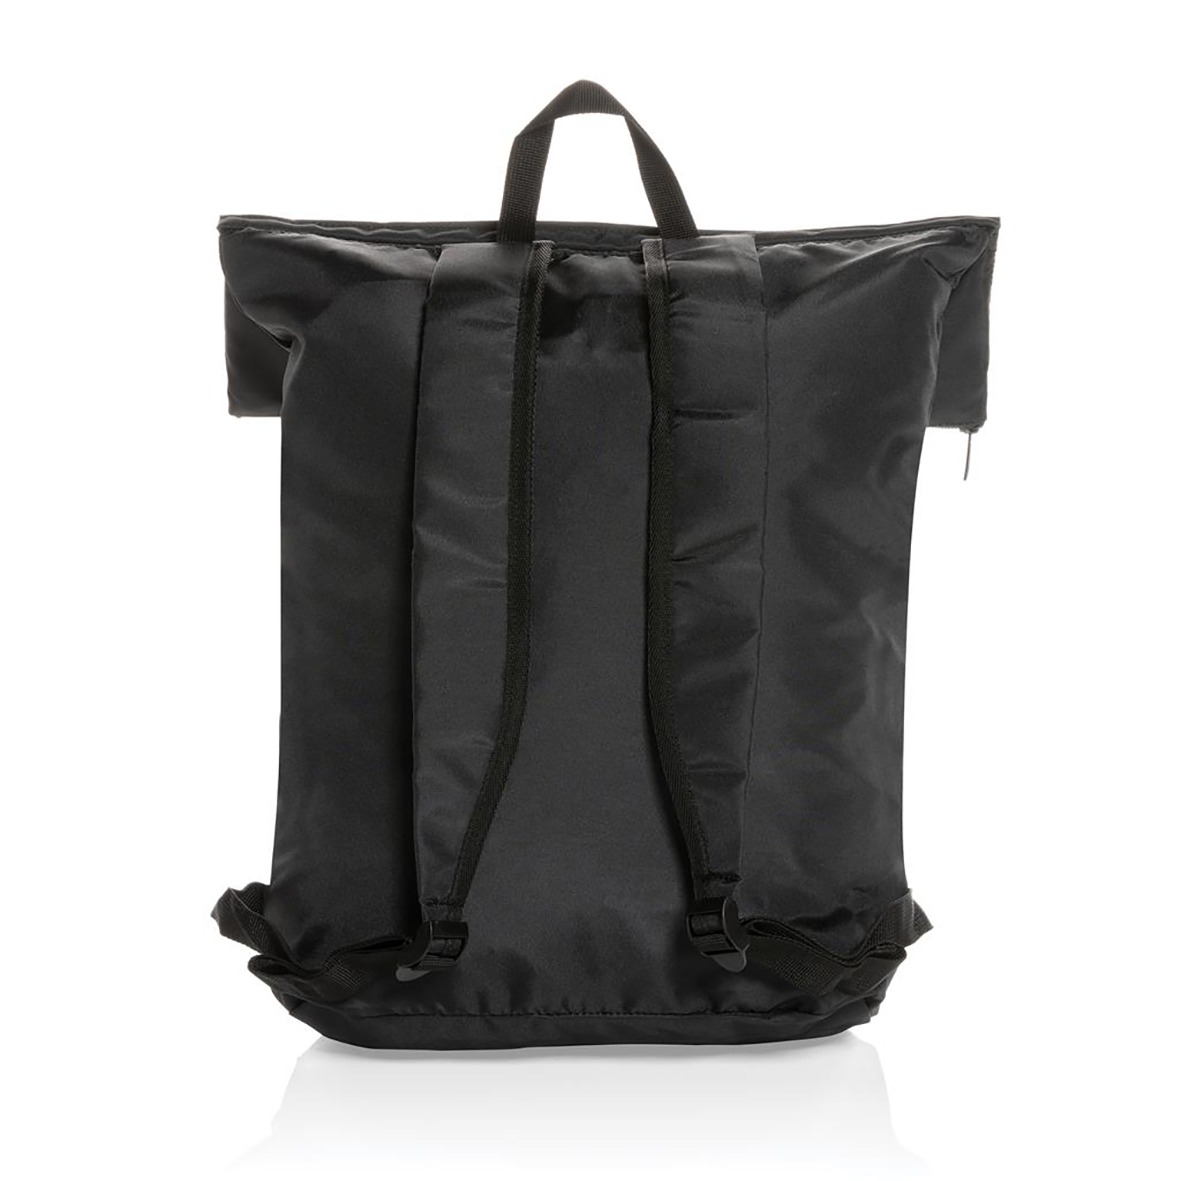 Sac a dos pliable, recycle, personnalise-7